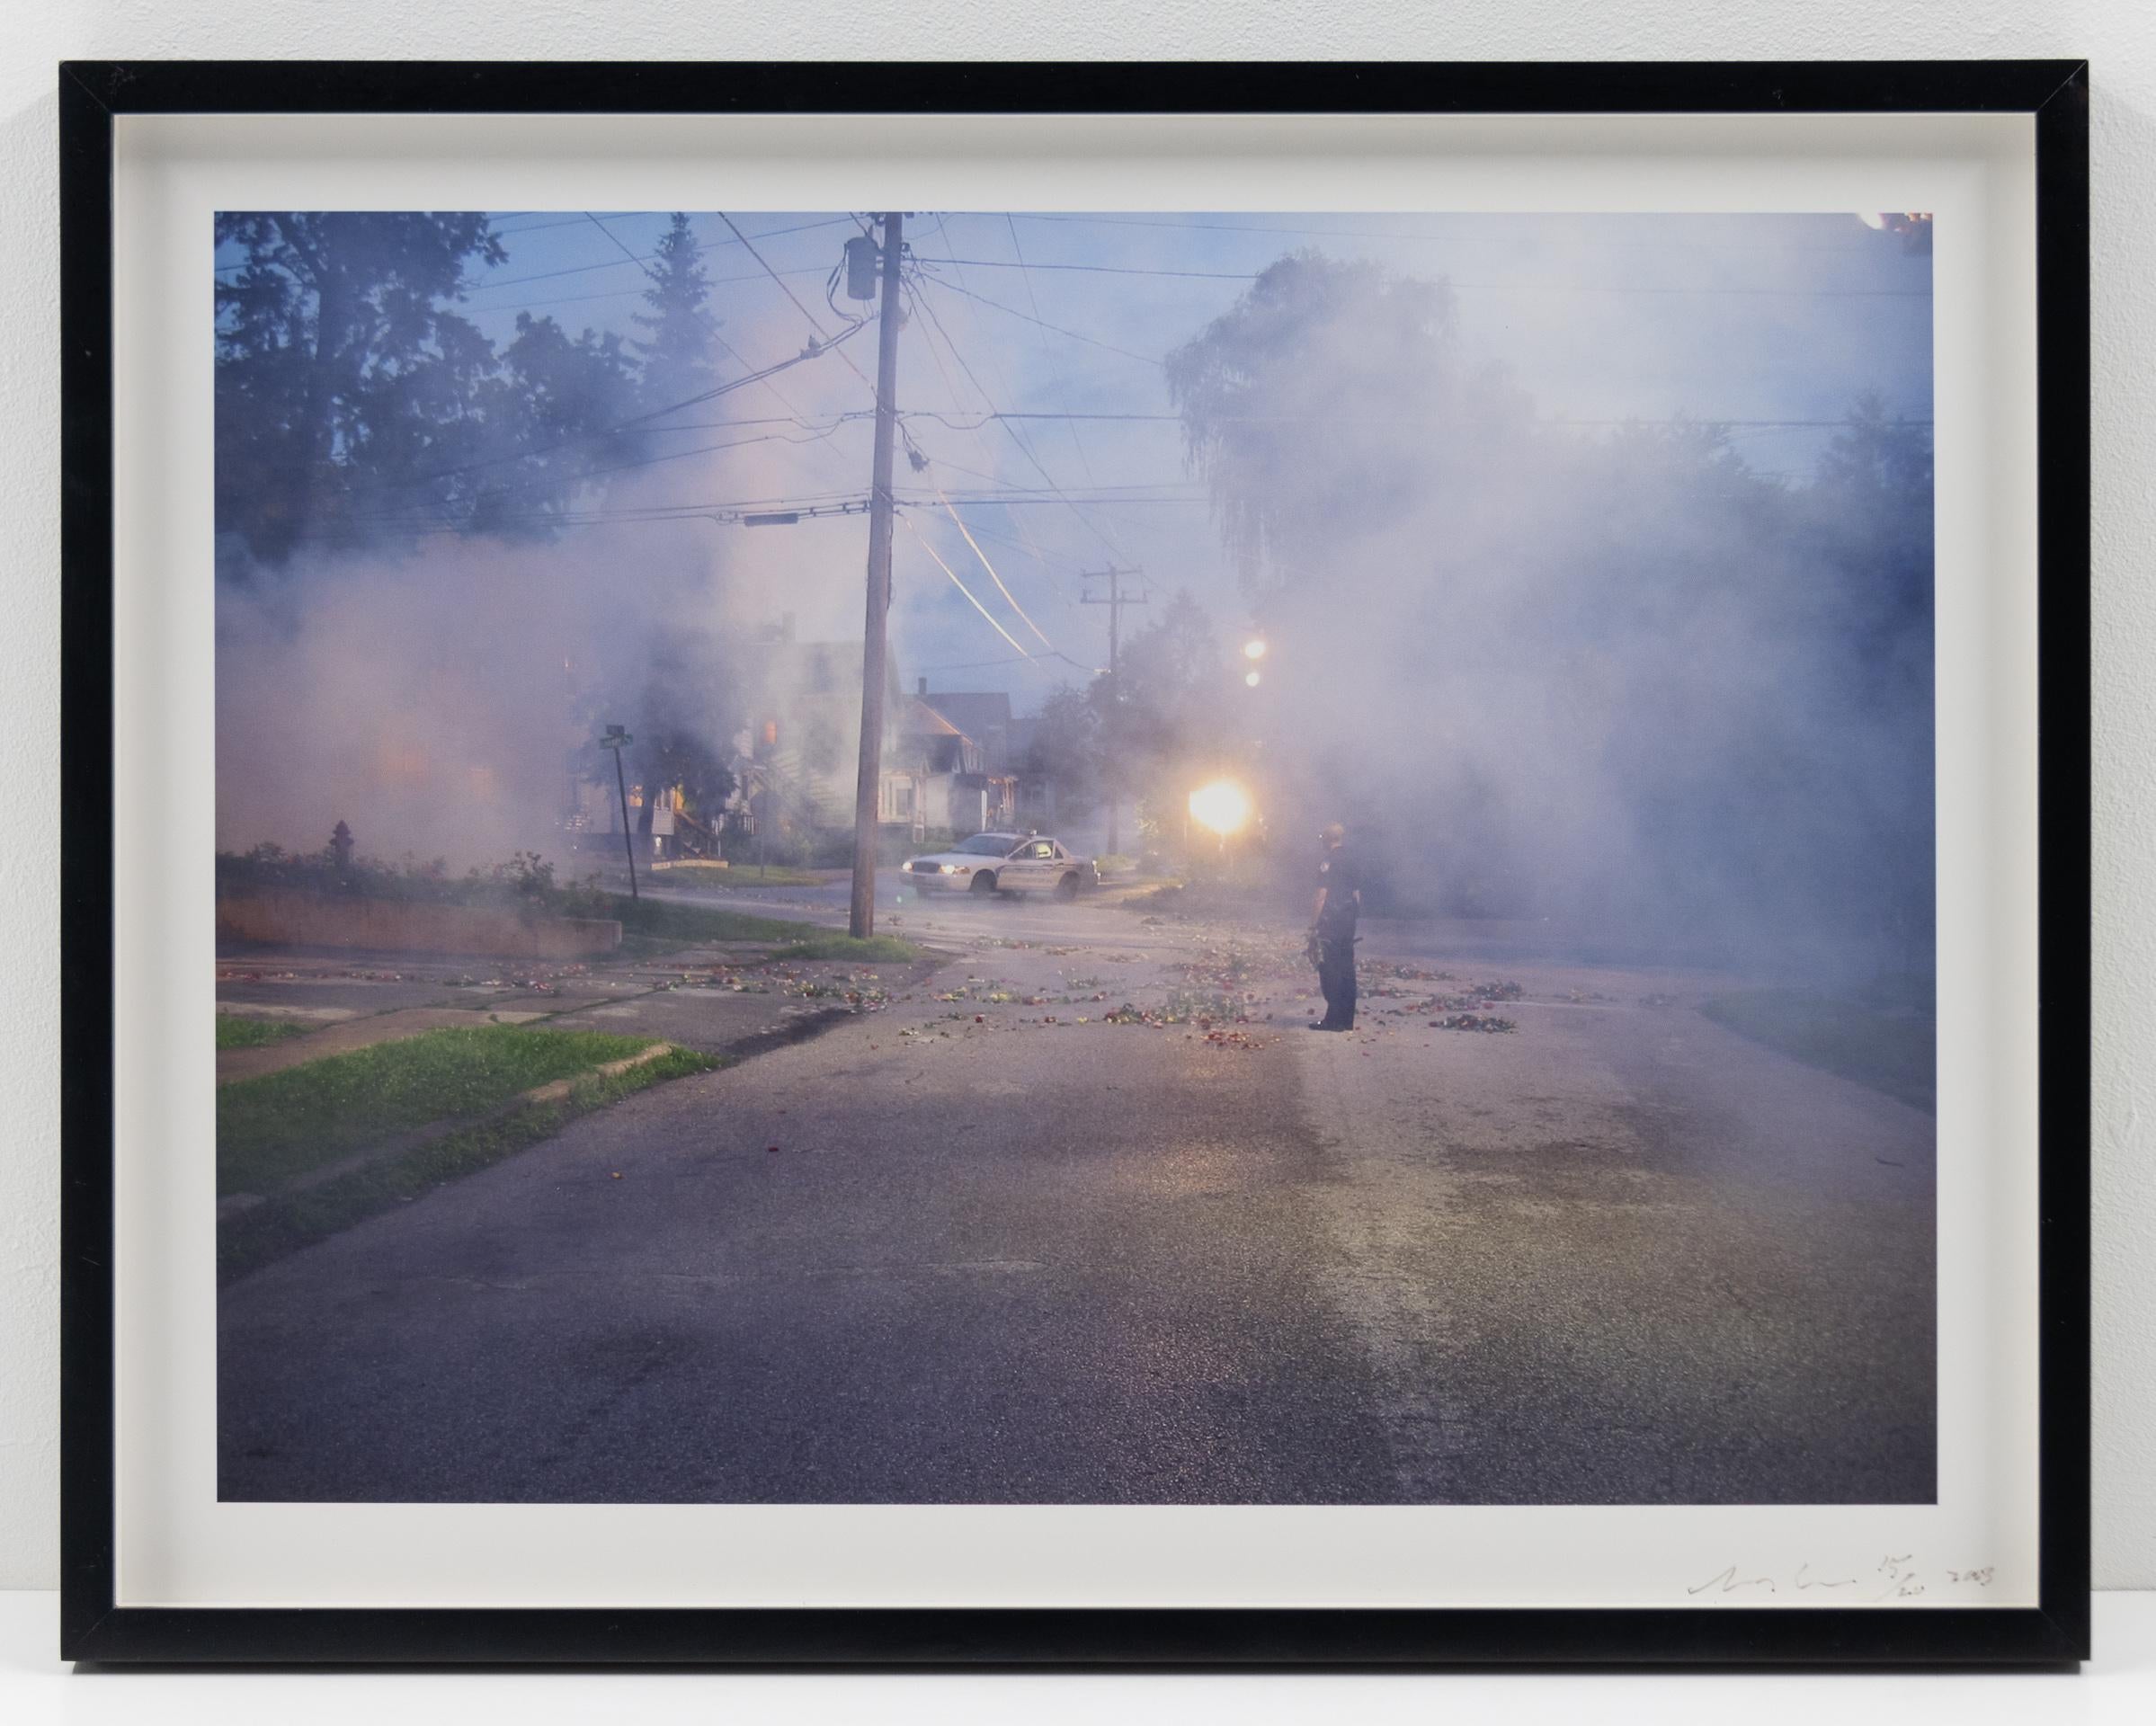 Production Still (Library Still #2) - Photograph by Gregory Crewdson